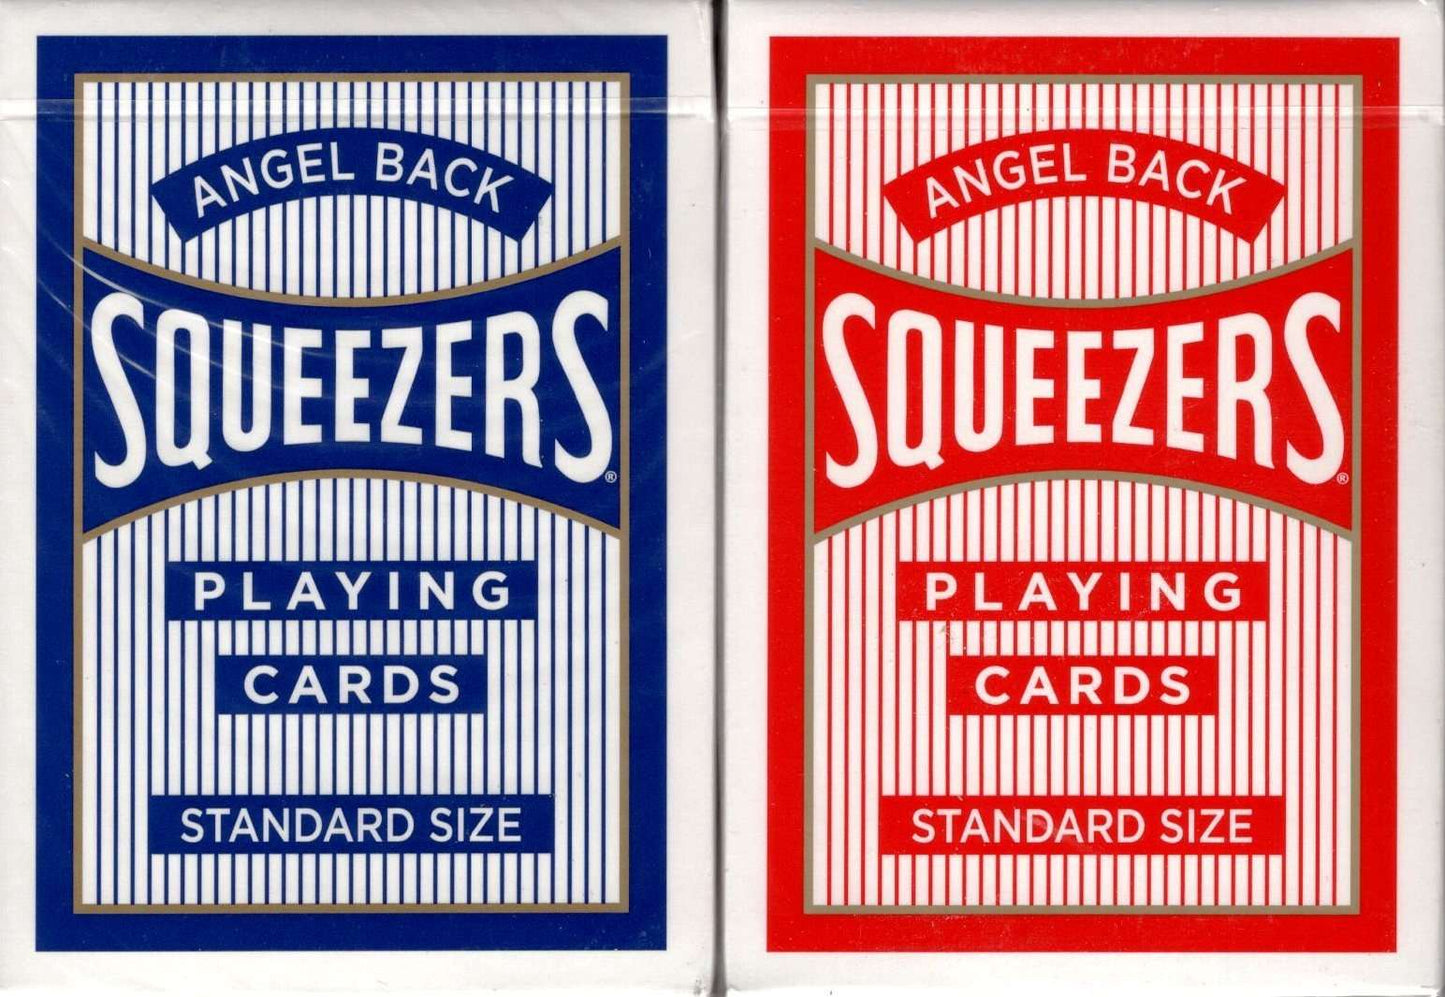 PlayingCardDecks.com-Angel Back Squeezers Playing Cards USPCC: 2 Deck Set